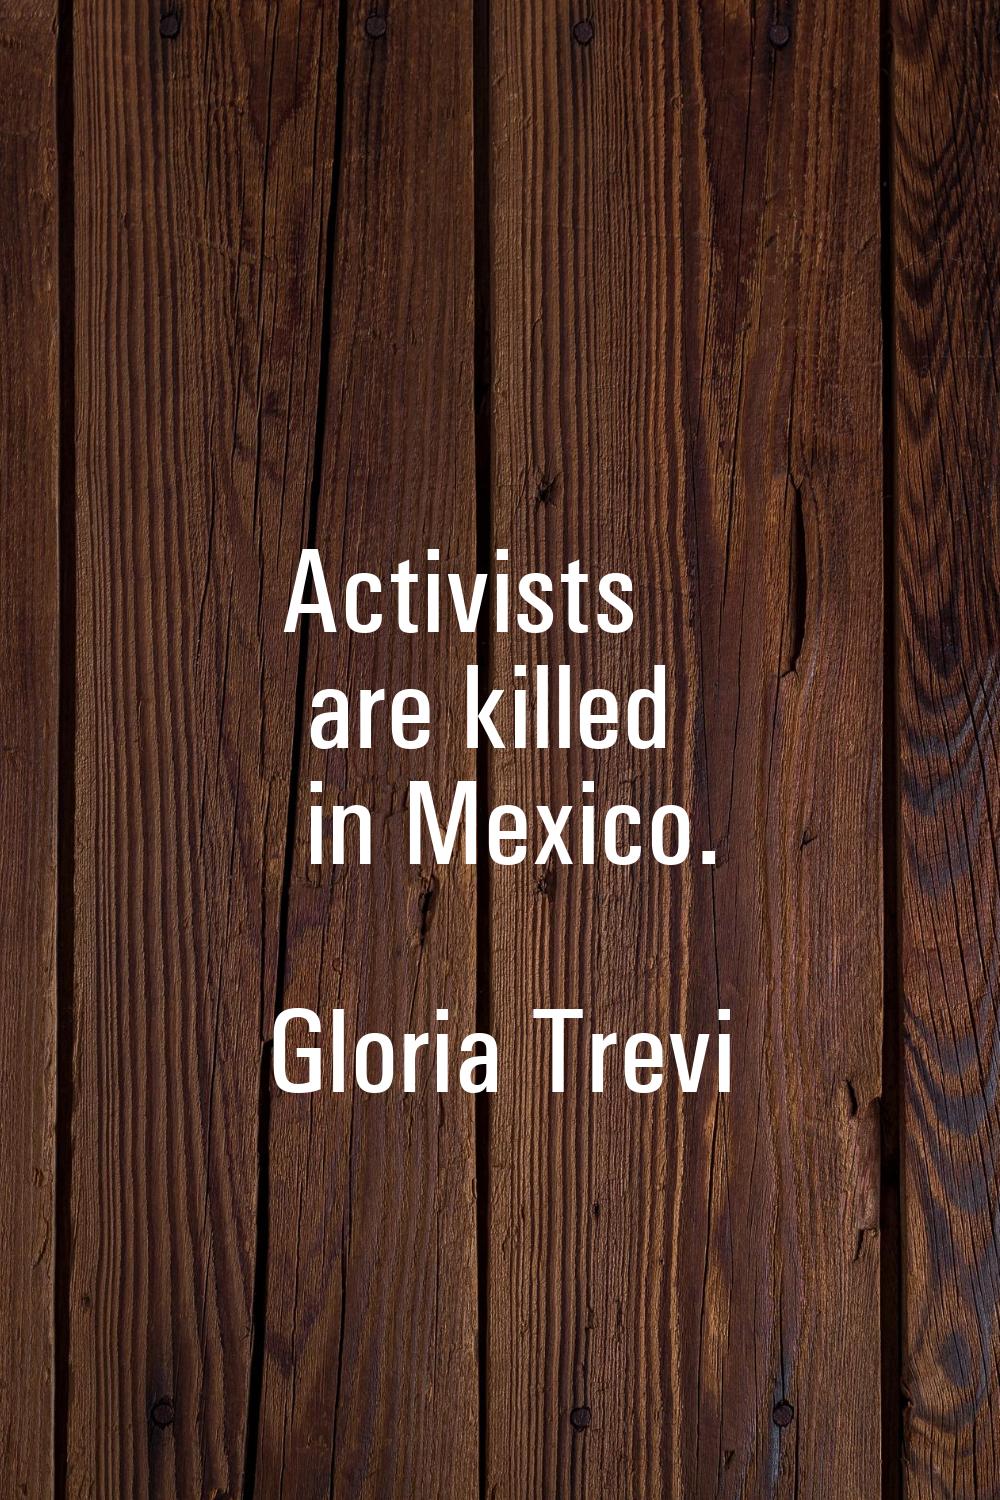 Activists are killed in Mexico.